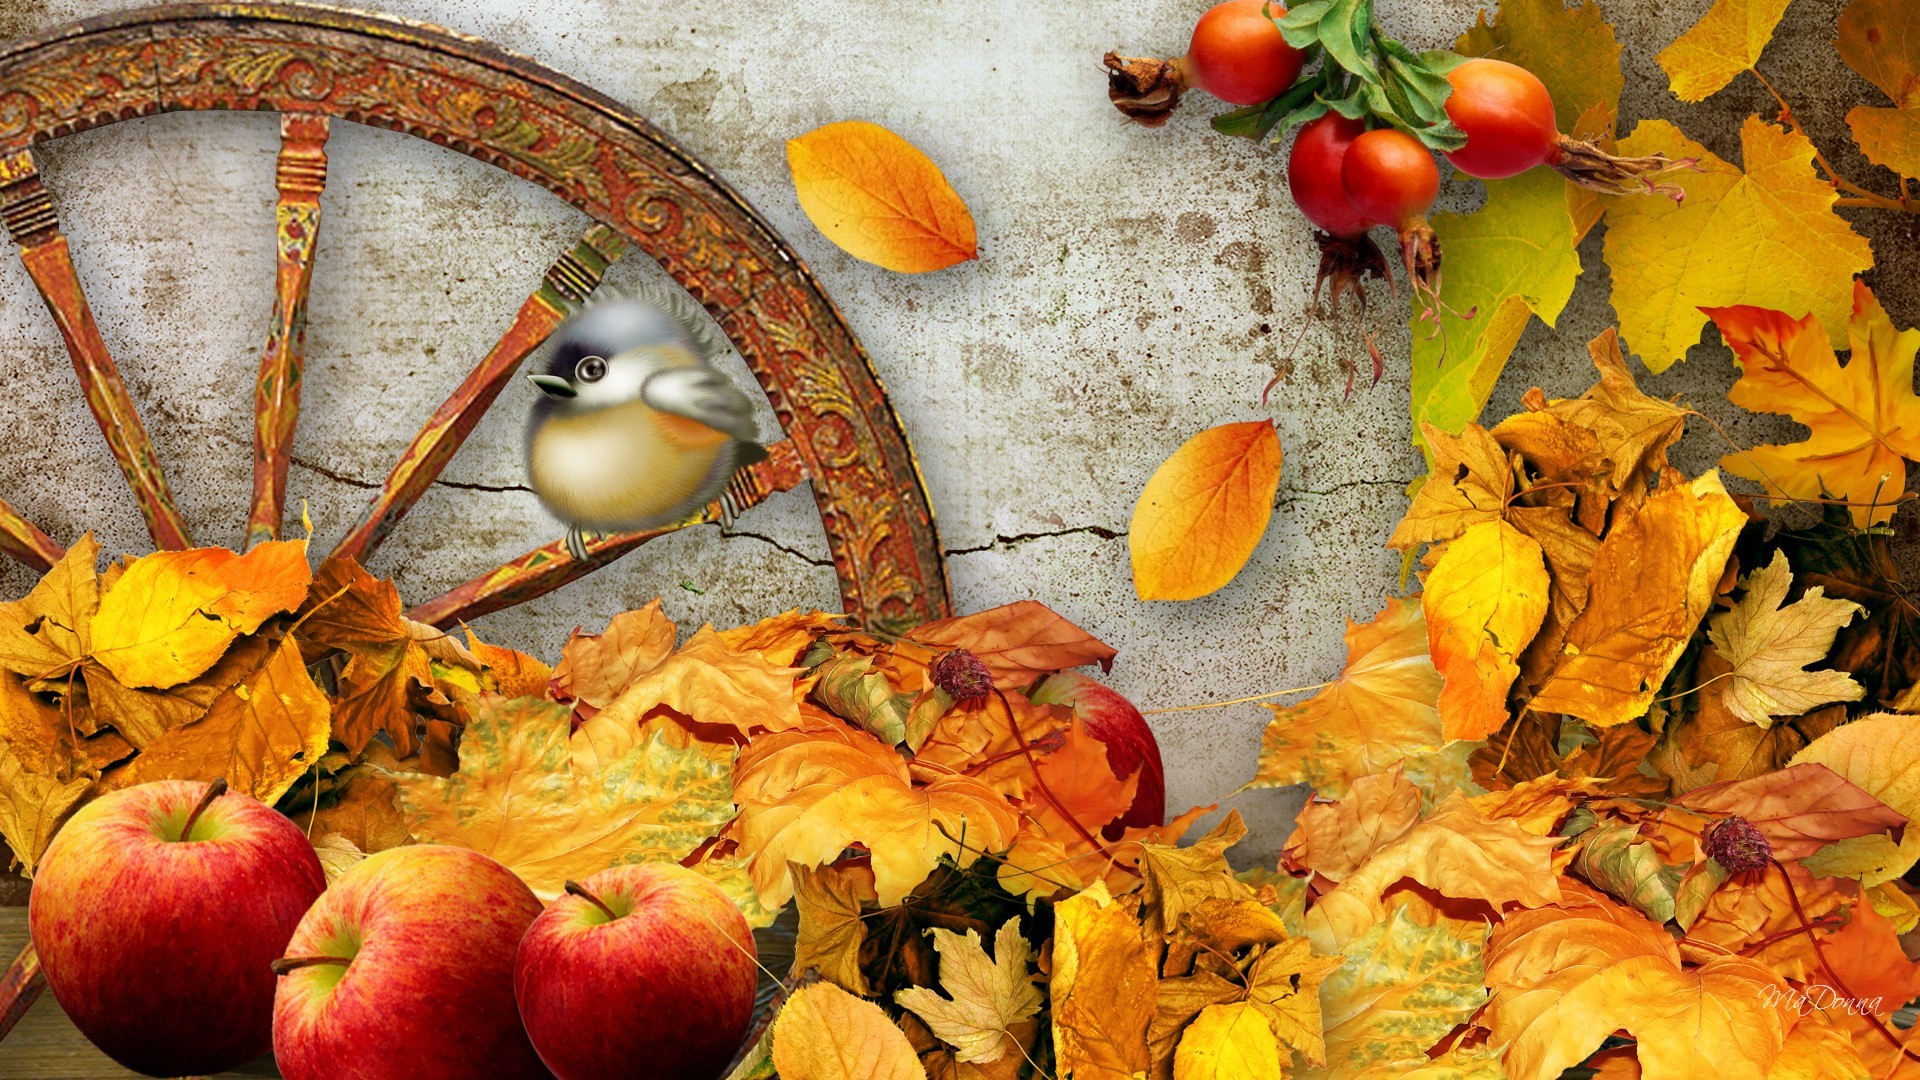 1920x1080 Fall Harvest Wallpaper Free | Natures Wallpapers | Pinterest | Fall harvest  and Wallpaper